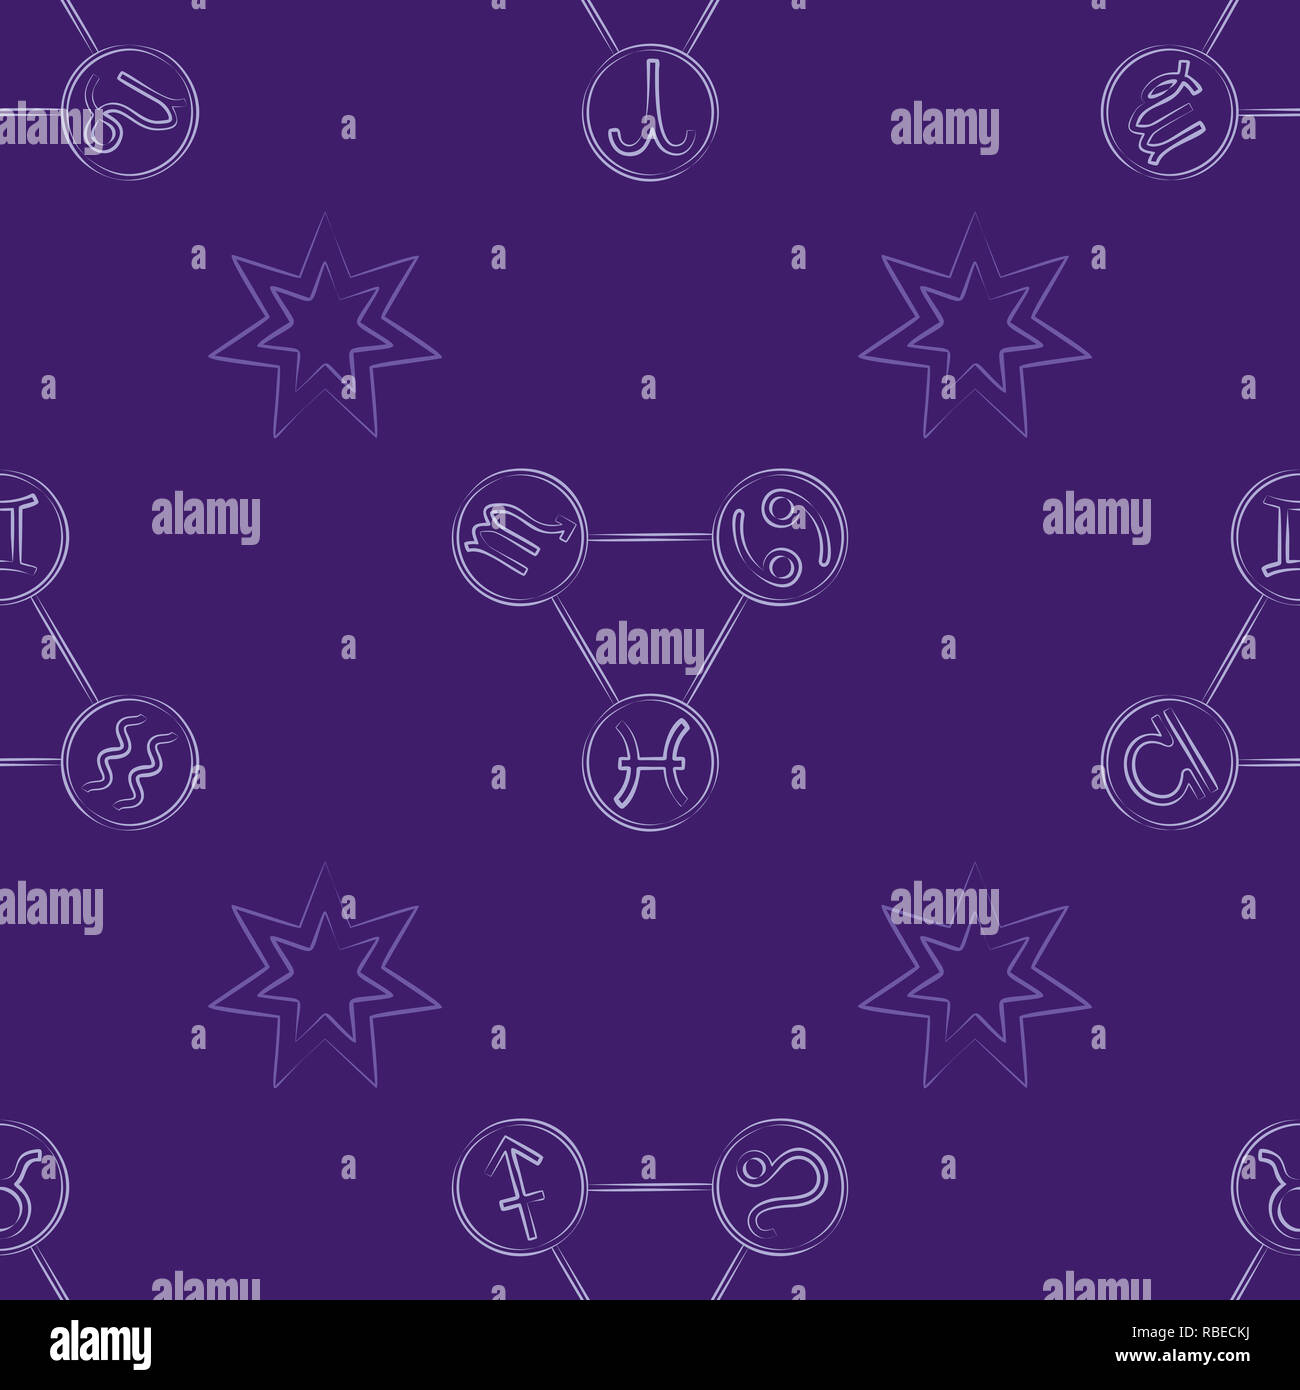 Zodiac signs seamless pattern with stars and division - triplicity (elements - fire, air, water, earth) Stock Photo